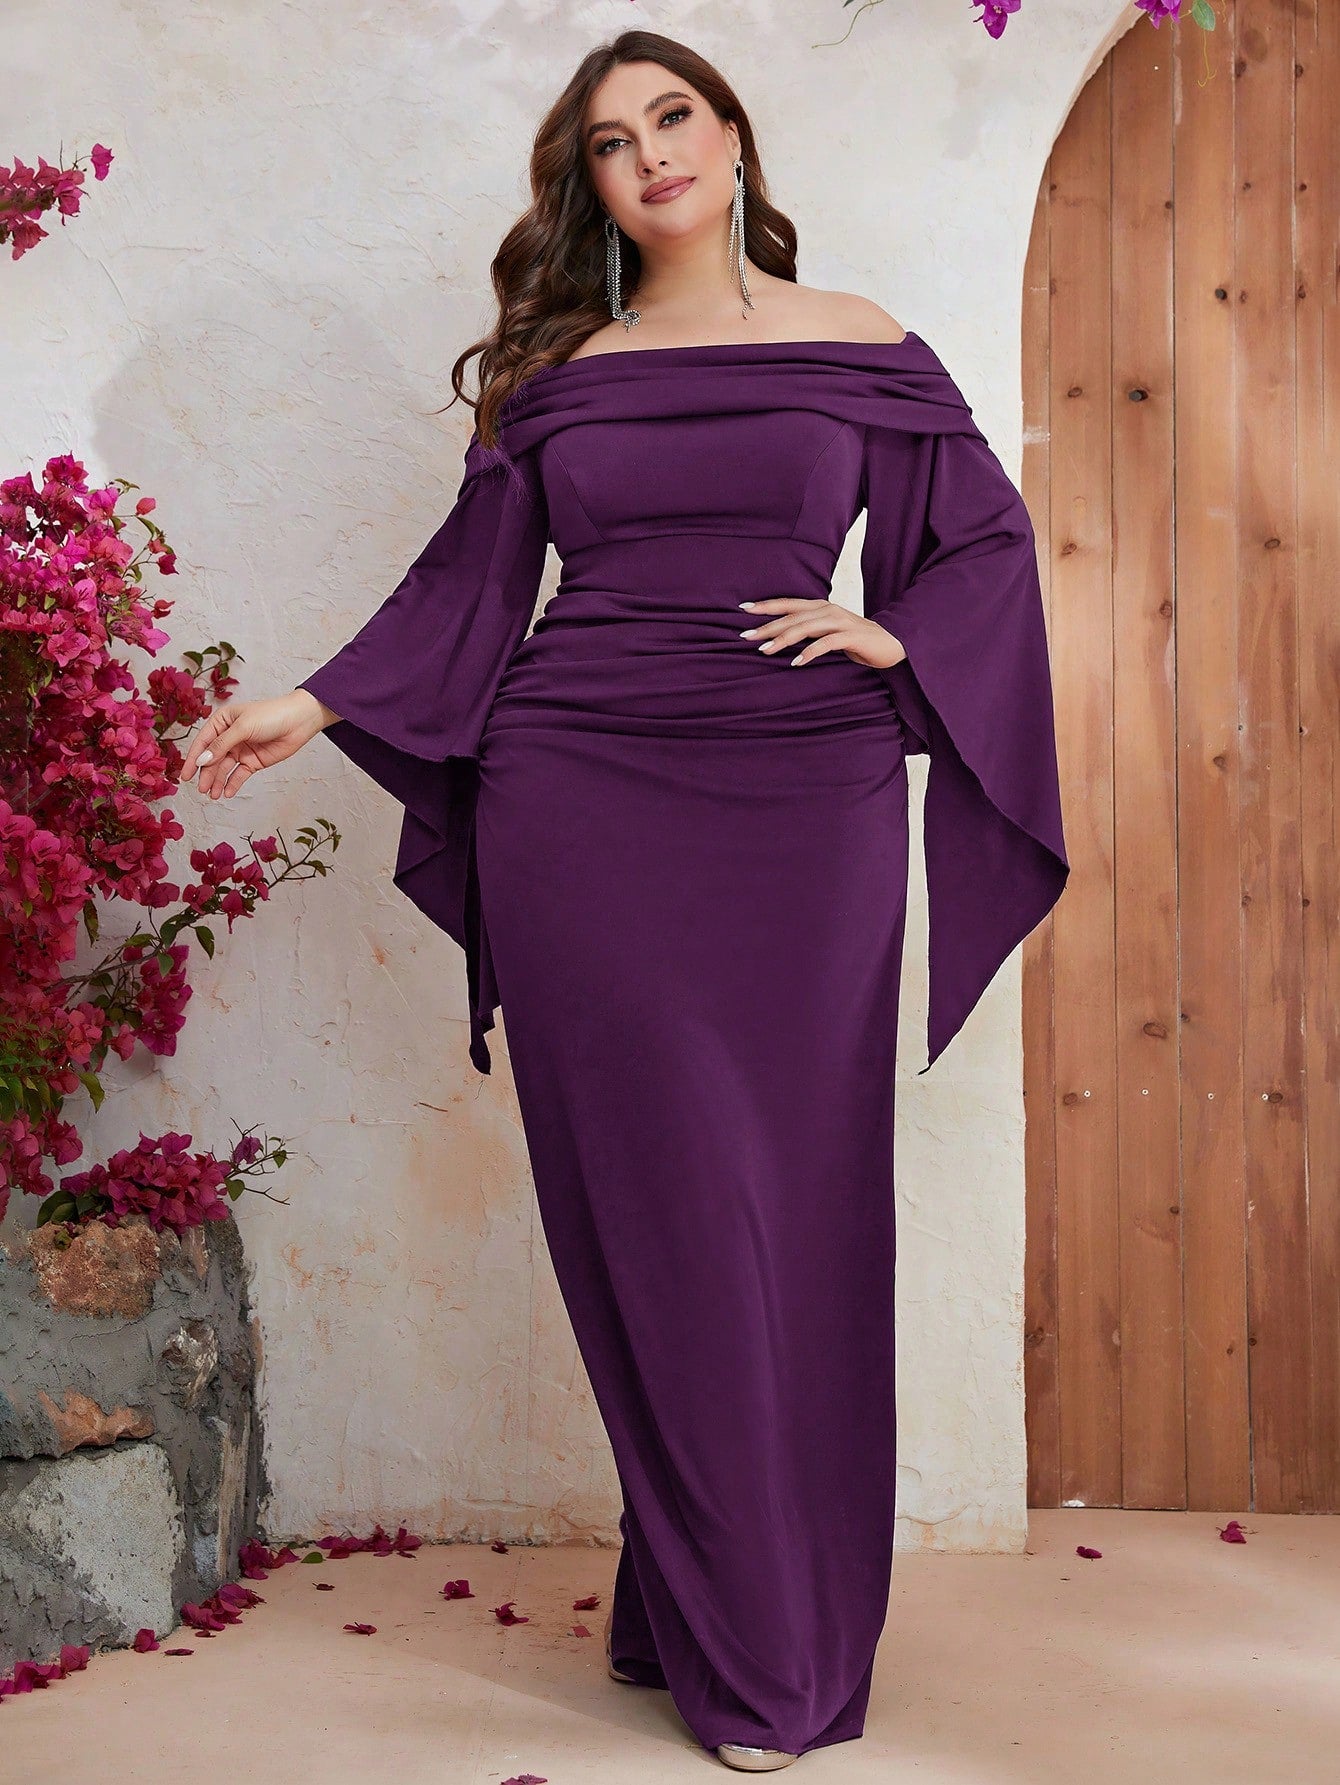 Stunning Off-Shoulder Full-Length Plus Size Dress with Flared Sleeves and Ruched Detail - Alluring and Sophisticated Evening Wear